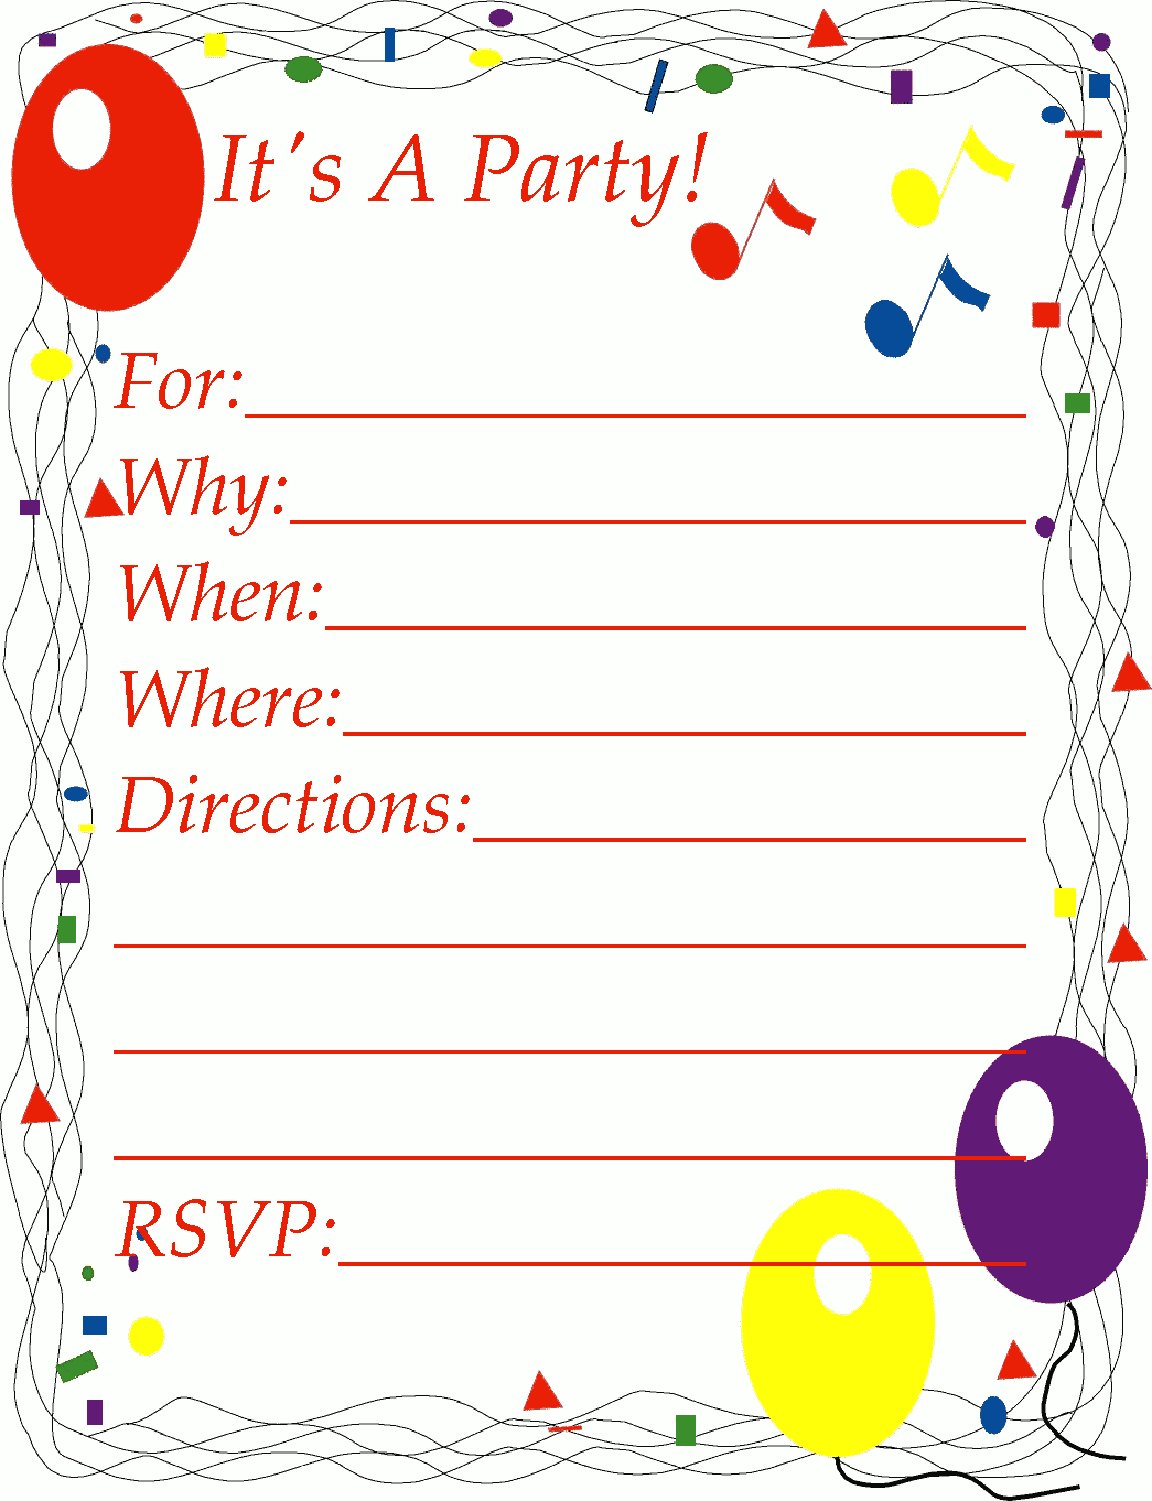 clipart of invitation cards - photo #7